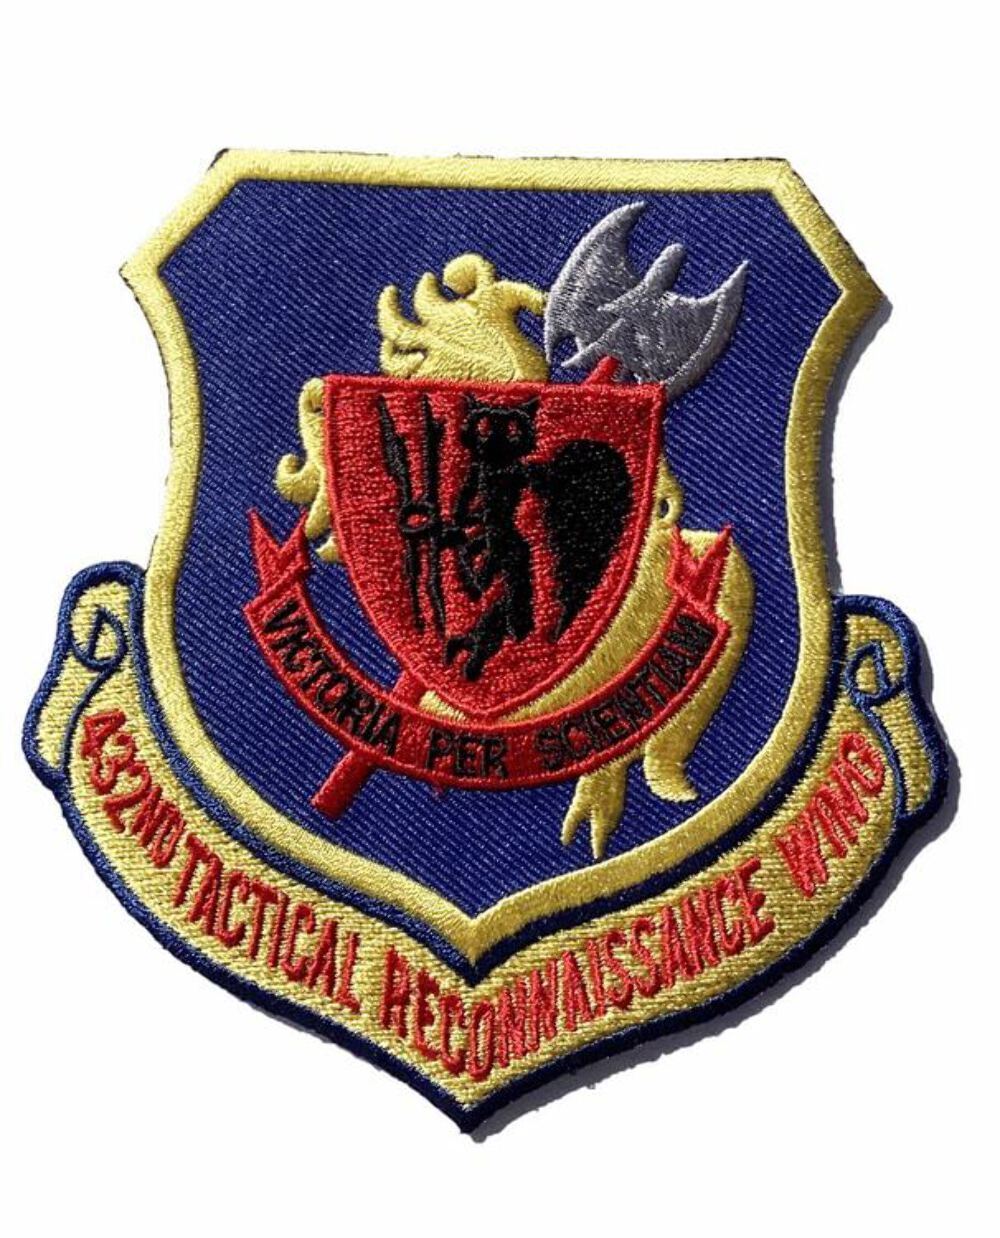 432ND TACTICAL RECONNAISSANCE WING Patch – Plastic Backing